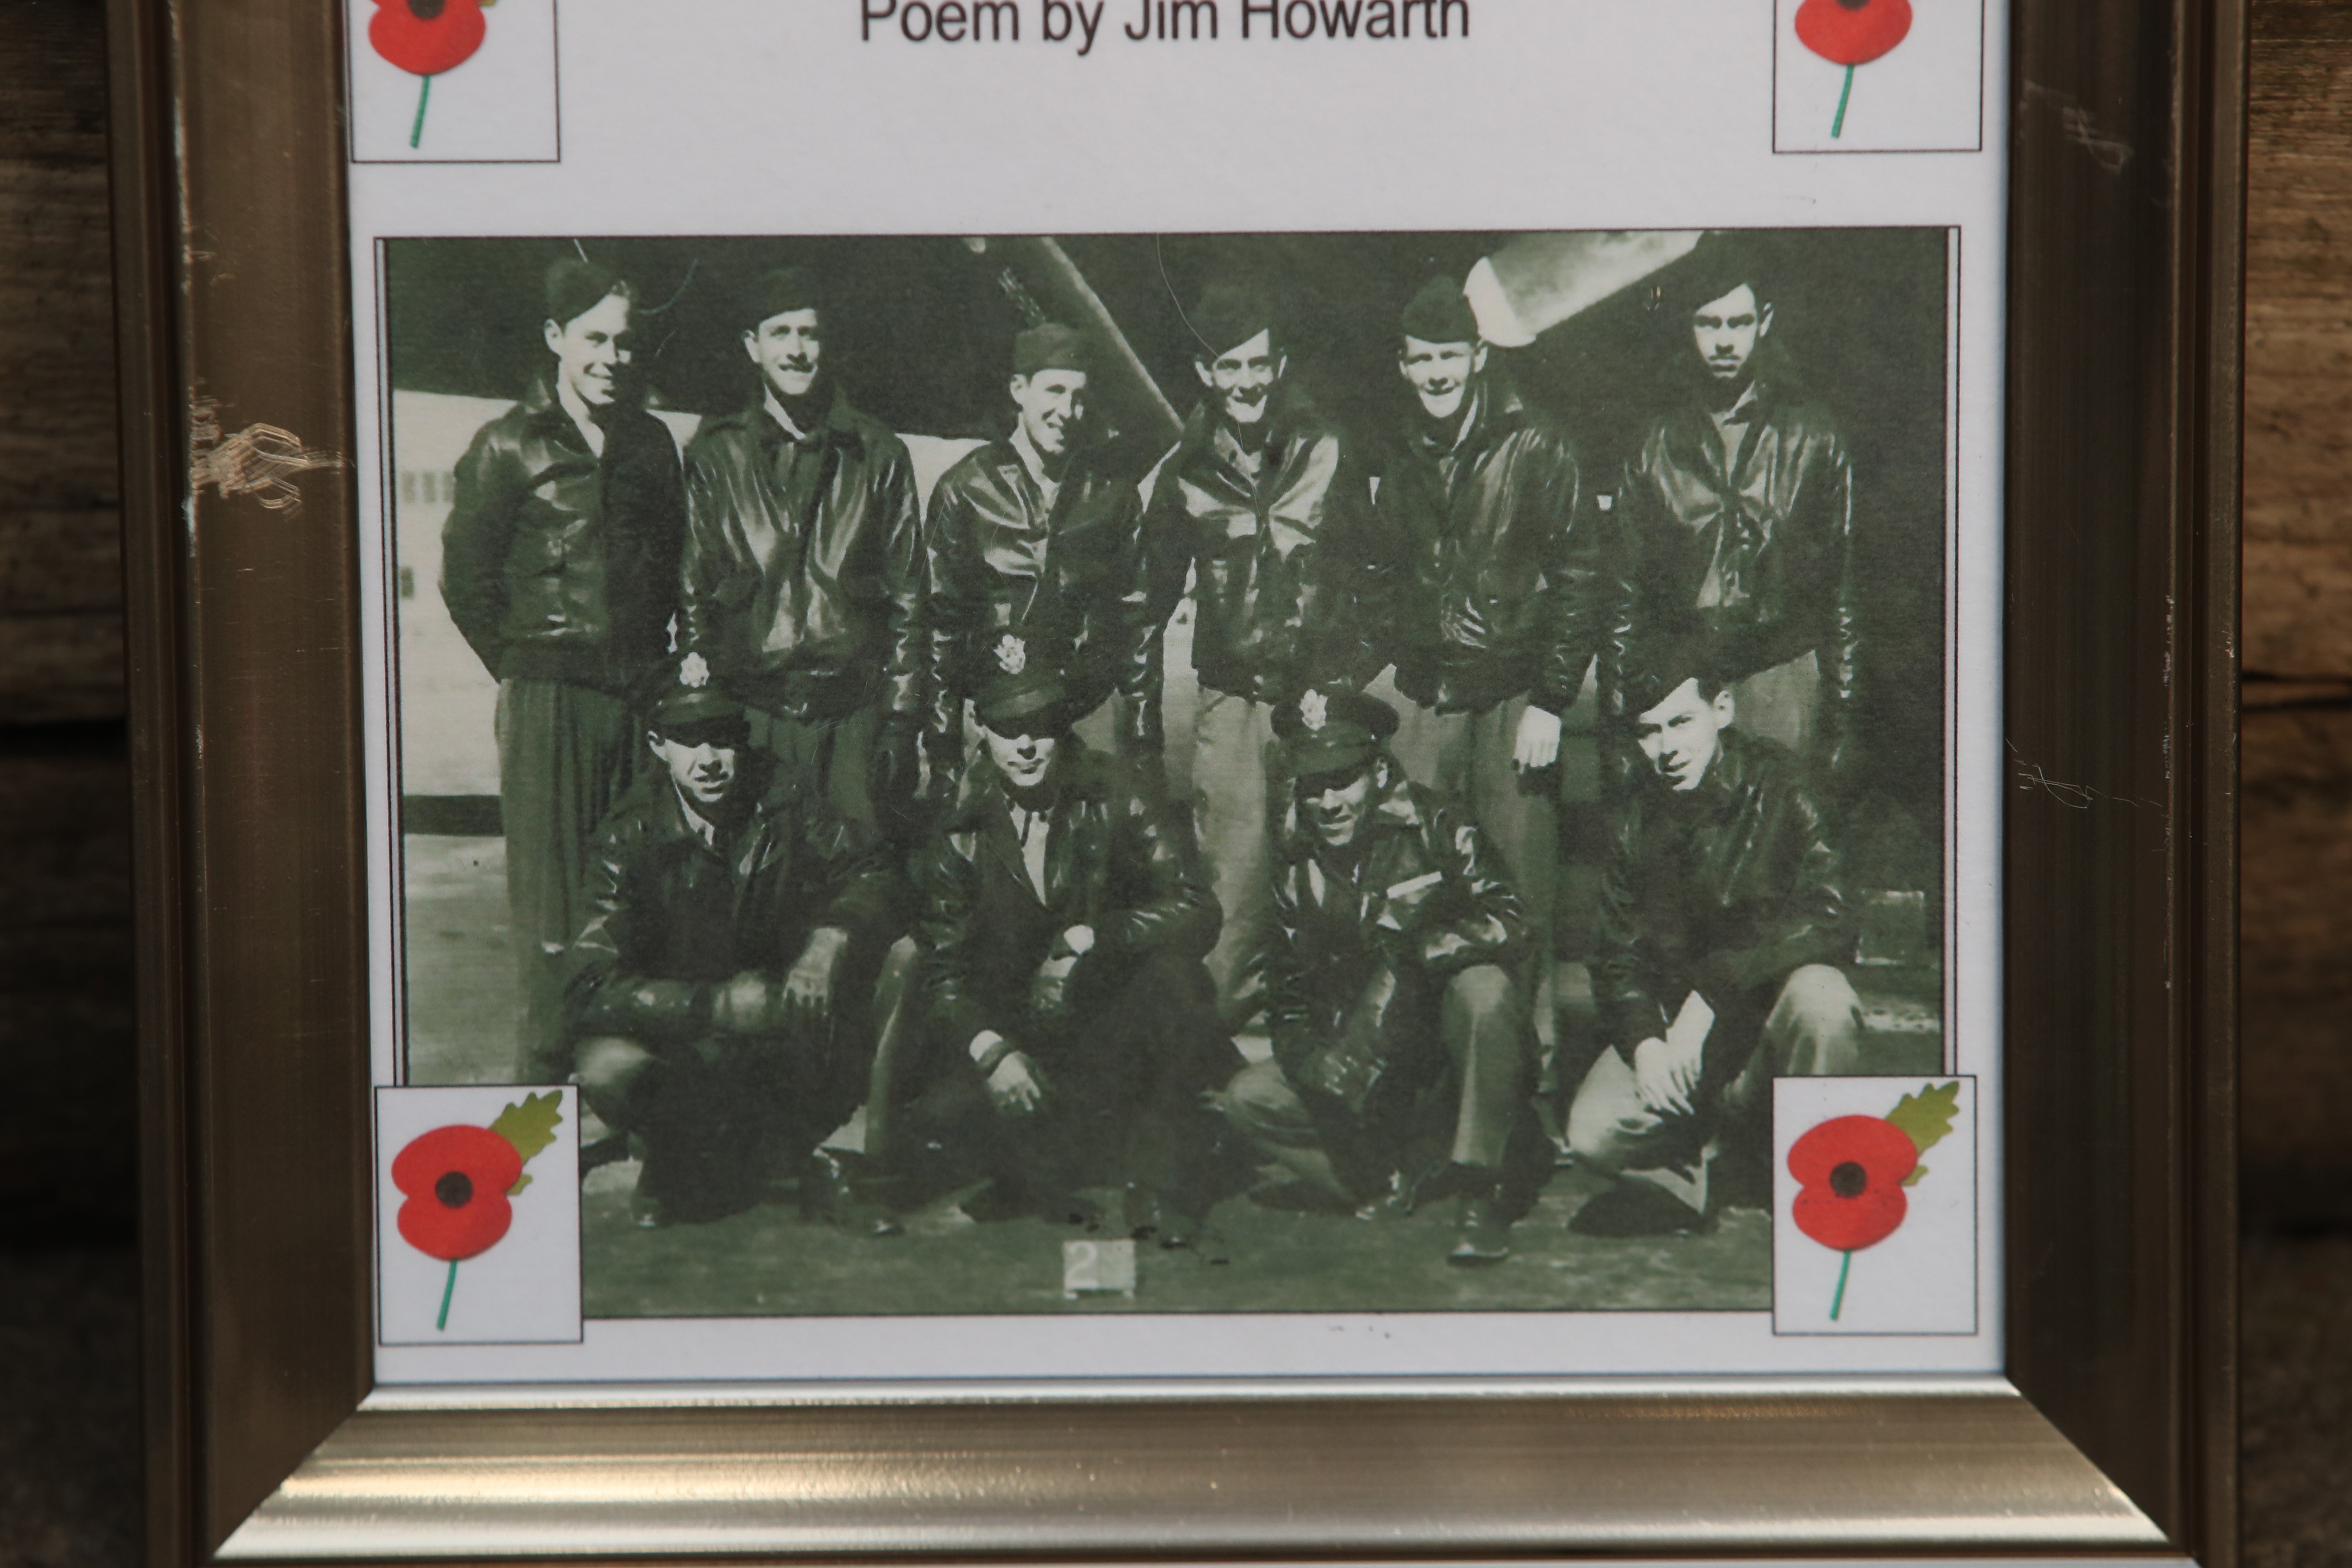 A crew photograph on the memorial in Sheffield to 10 American airmen